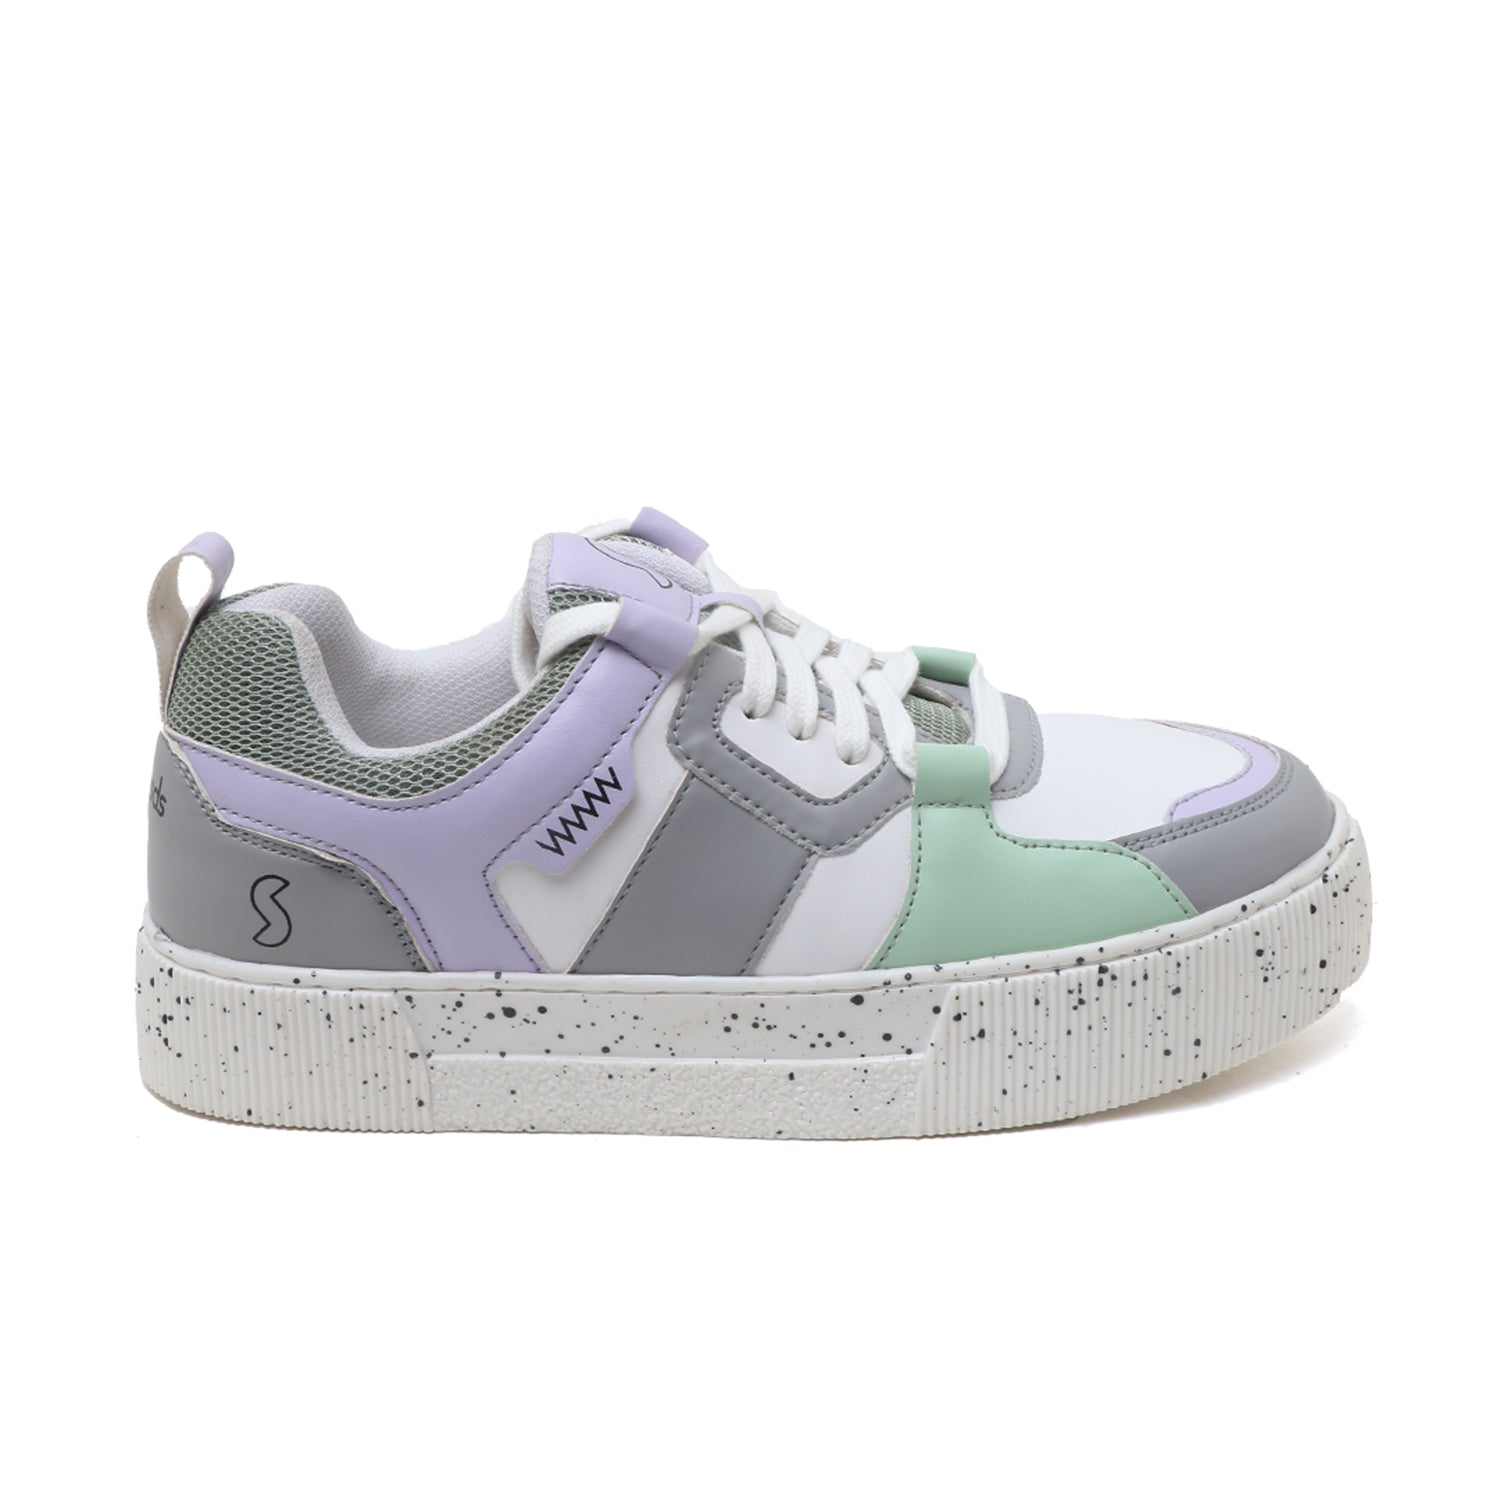 Fantasy Sneakers For Women - Solethreads